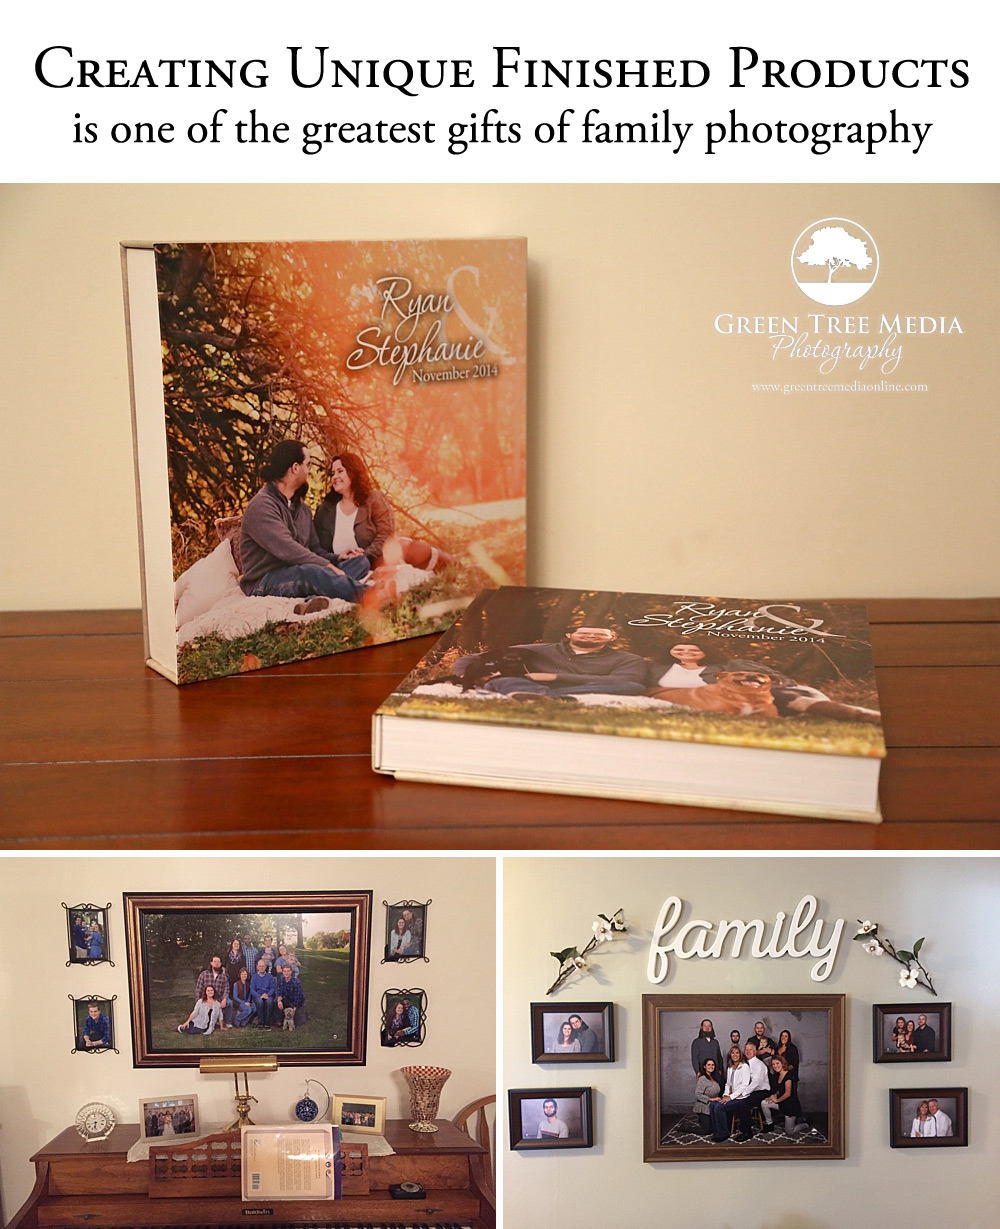 Family Photography: Creating Unique Finished Products